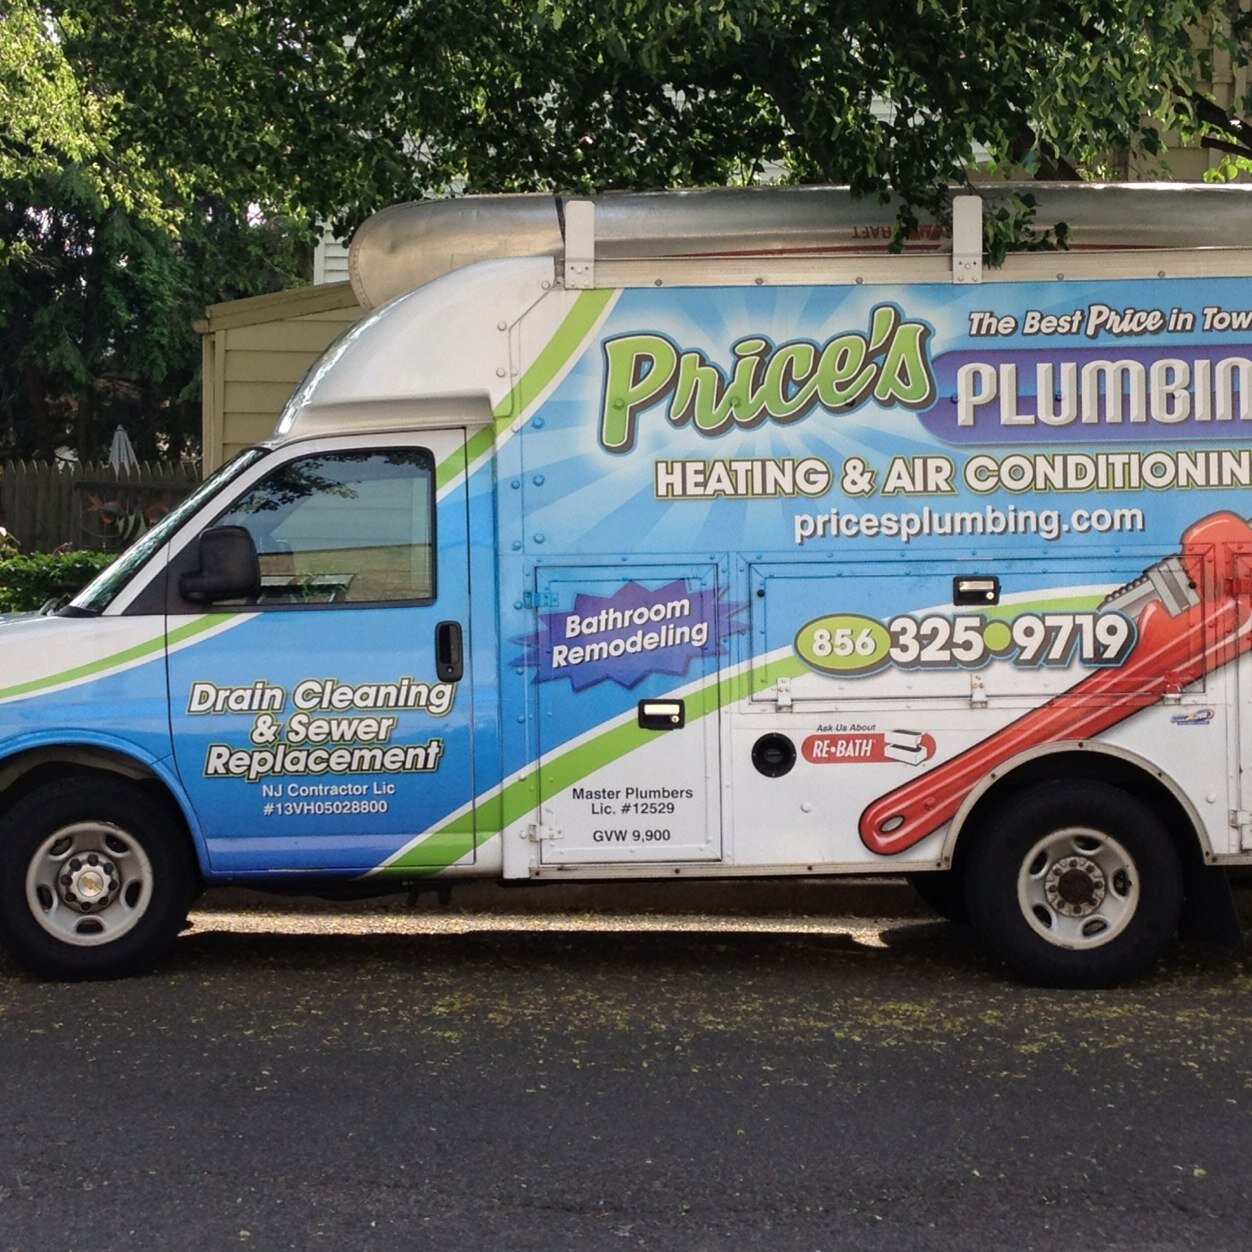 With over 25 years experience Price’s Plumbing & Heating, LLC is there for all your residential and commercial plumbing needs in New Jersey and Delaware.